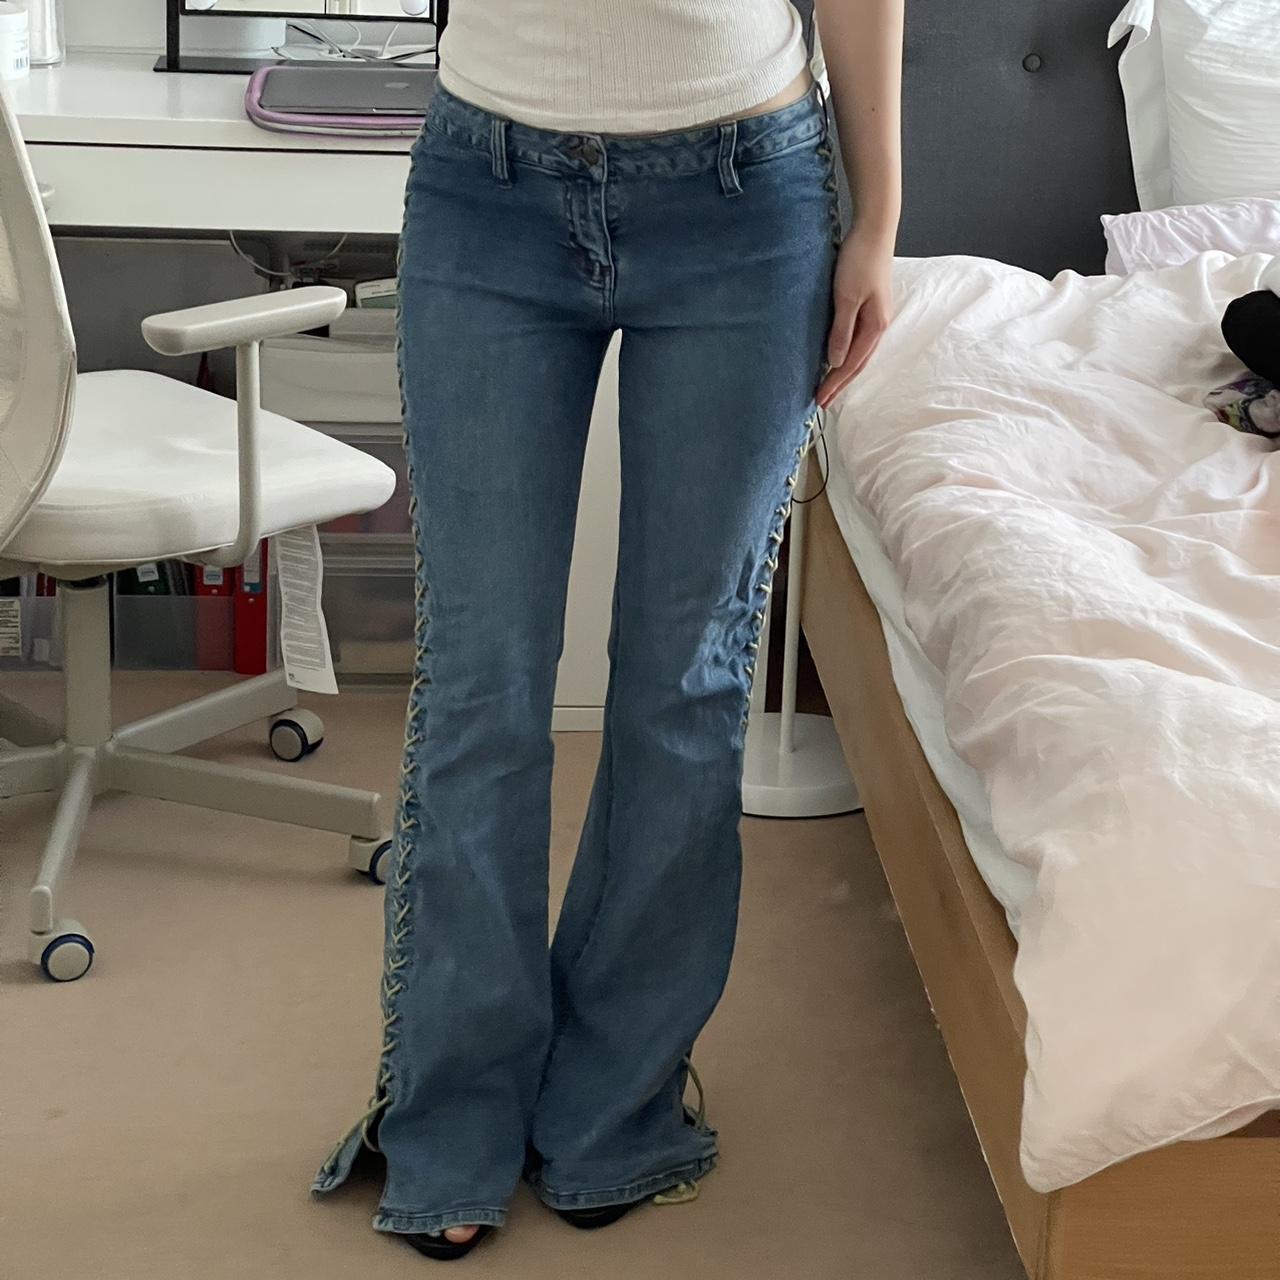 Lemaire cream sailor jeans. Barely worn, only once - Depop